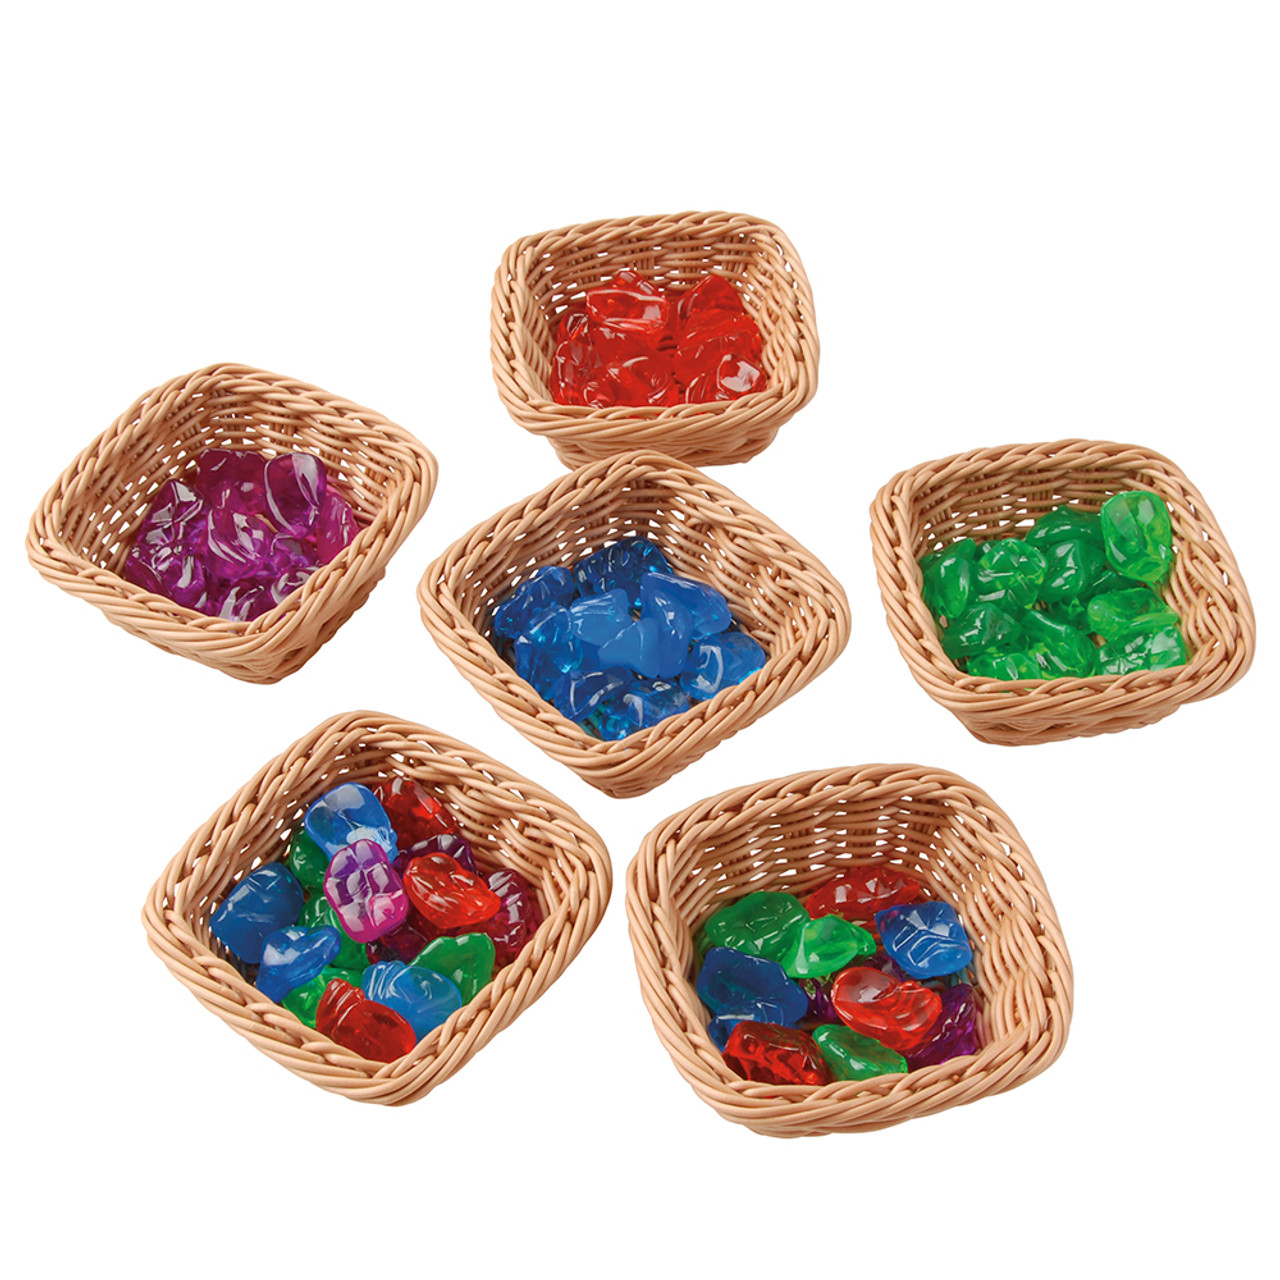 Large Baskets - 3 Group Colors - Set Of 6